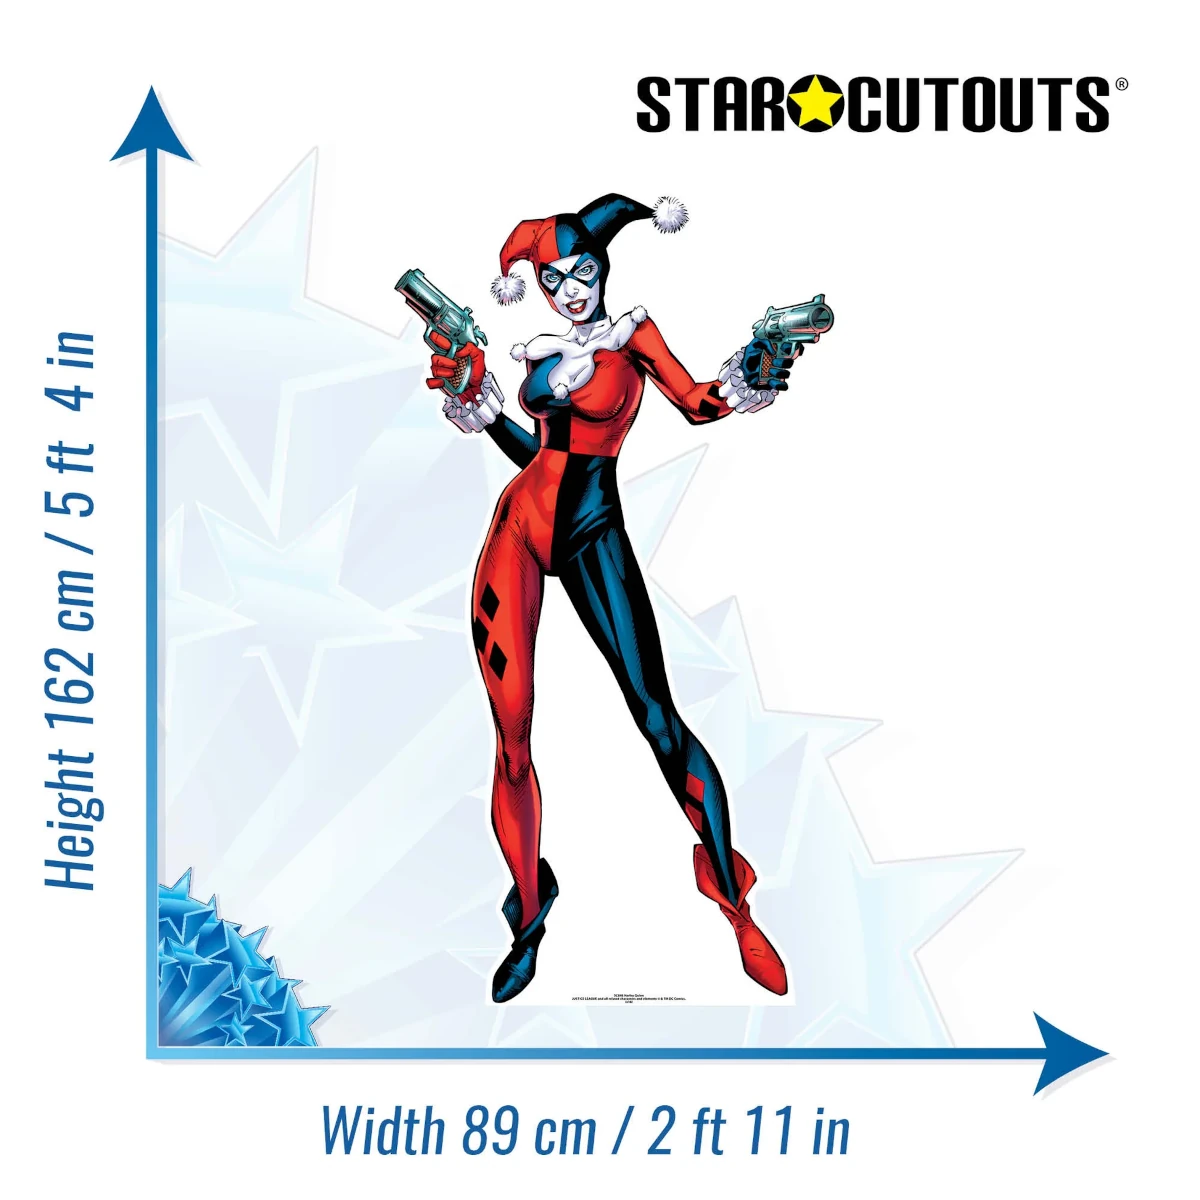 SC846 Harley Quinn 'Justice League' (DC Comics) Official Lifesize Cardboard Cutout Standee Size